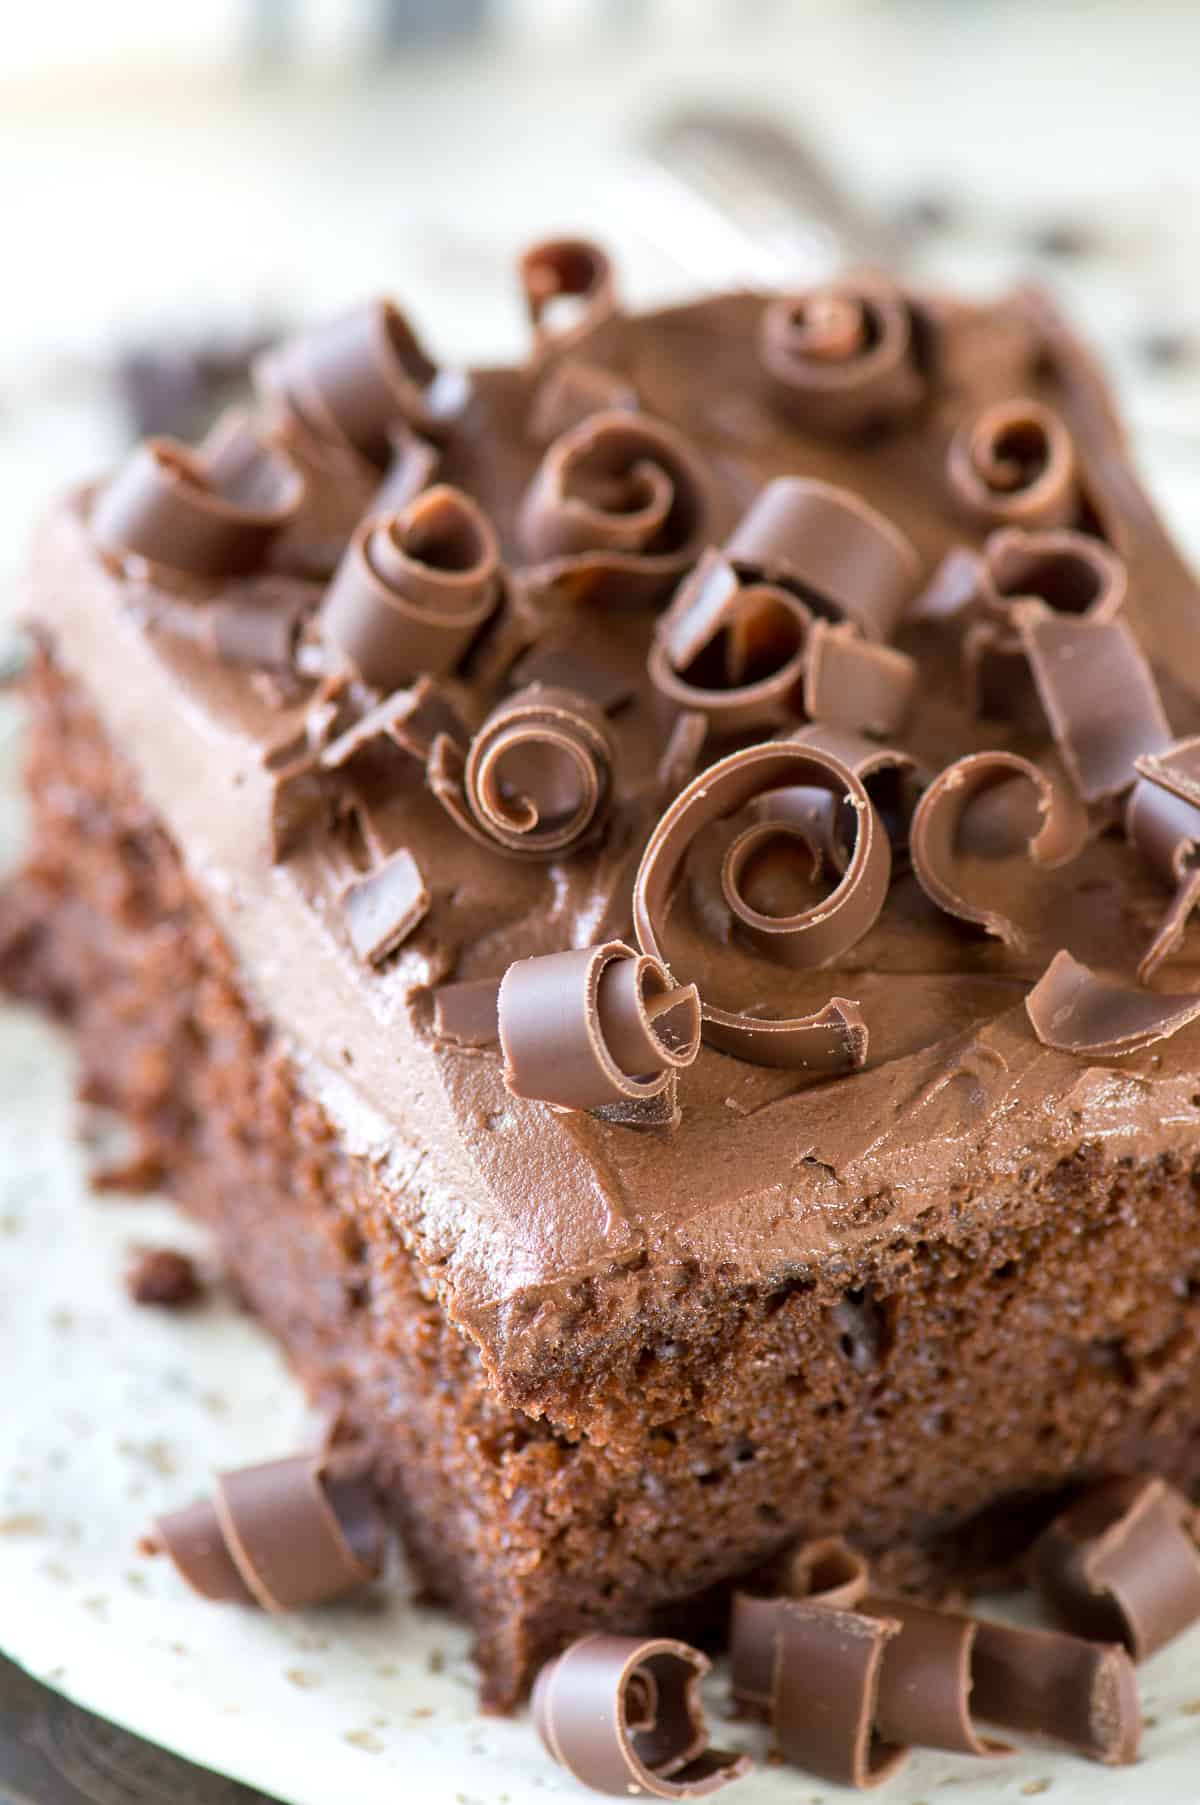 slice of chocolate cake with chocolate frosting and chocolate curls on white plate